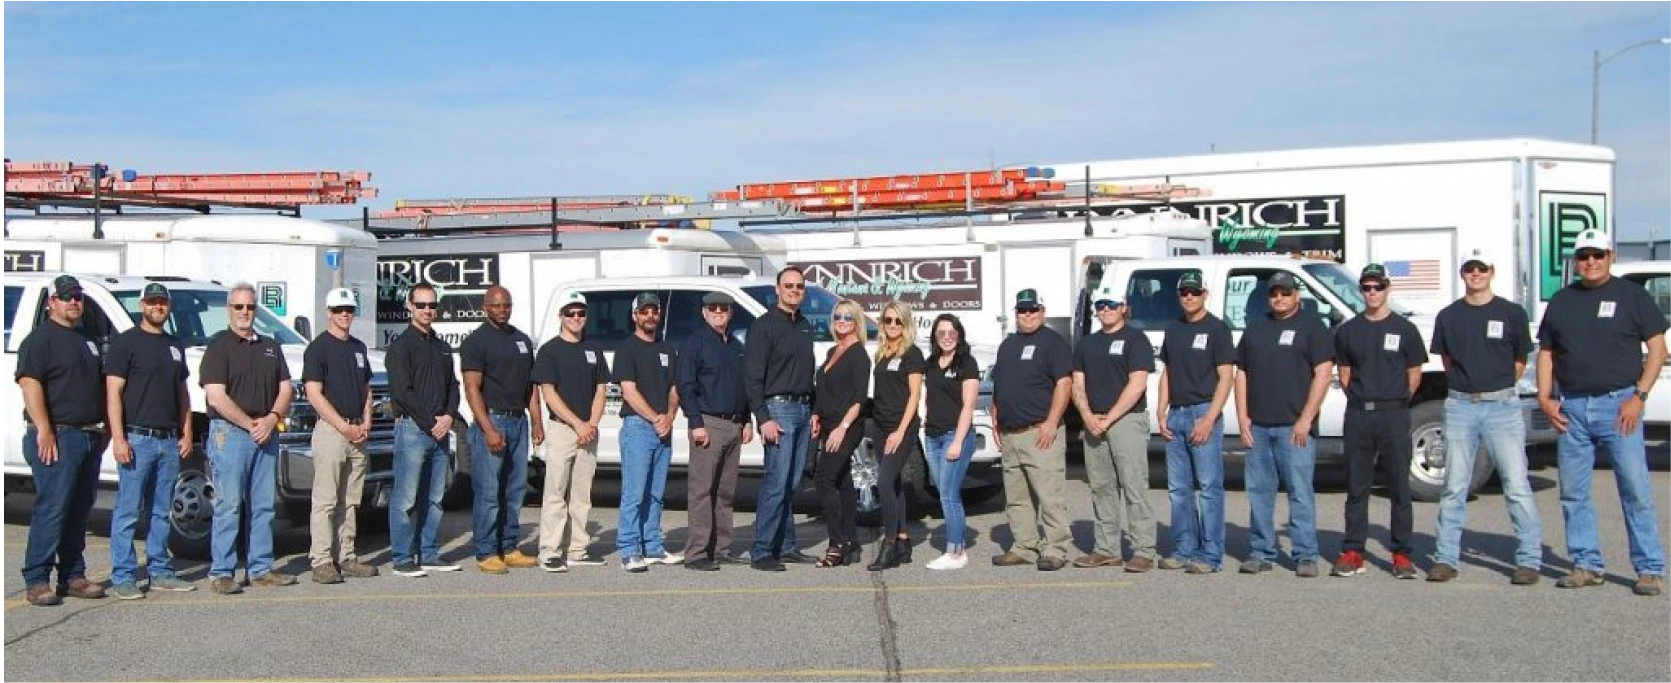 a group of people standing in front of a truck